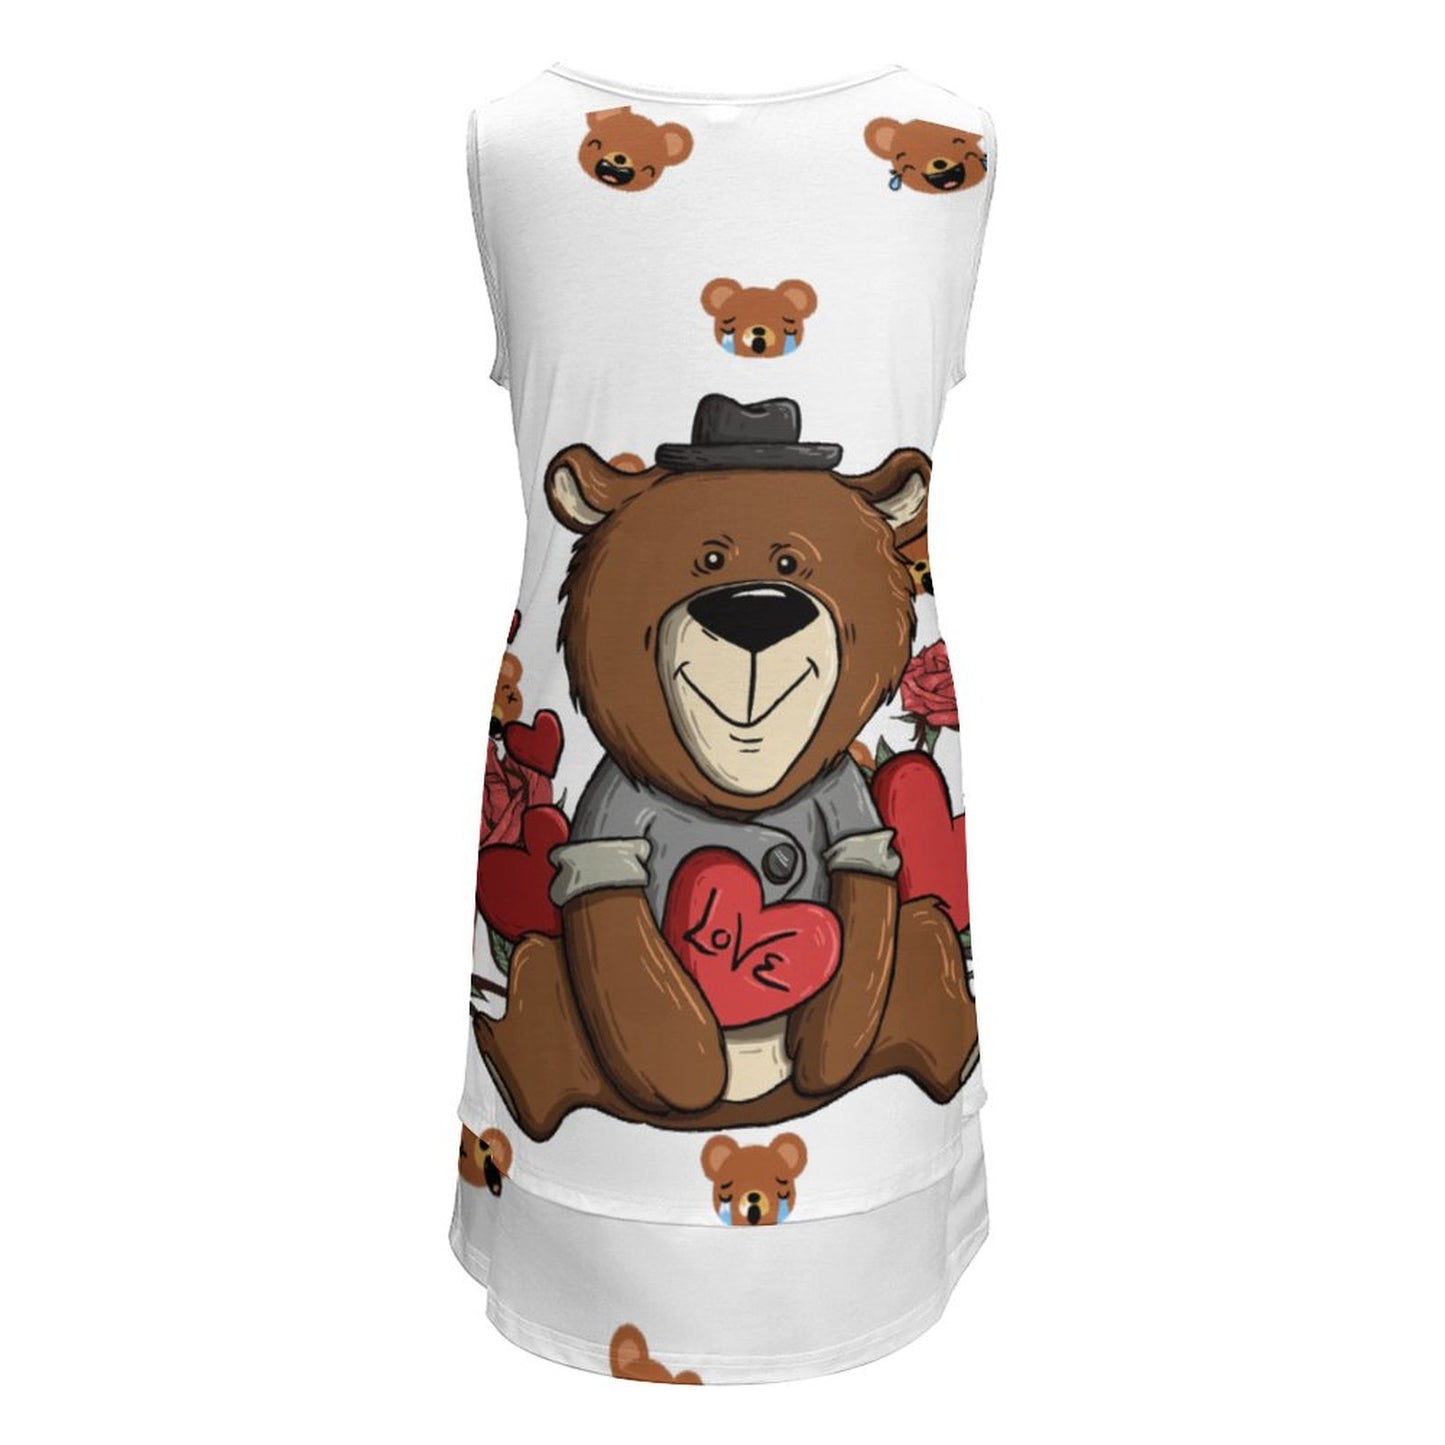 Online Customize Dress for Women Sleeveless U-neck Fake Two Piece Dress Teddy Bear And Roses